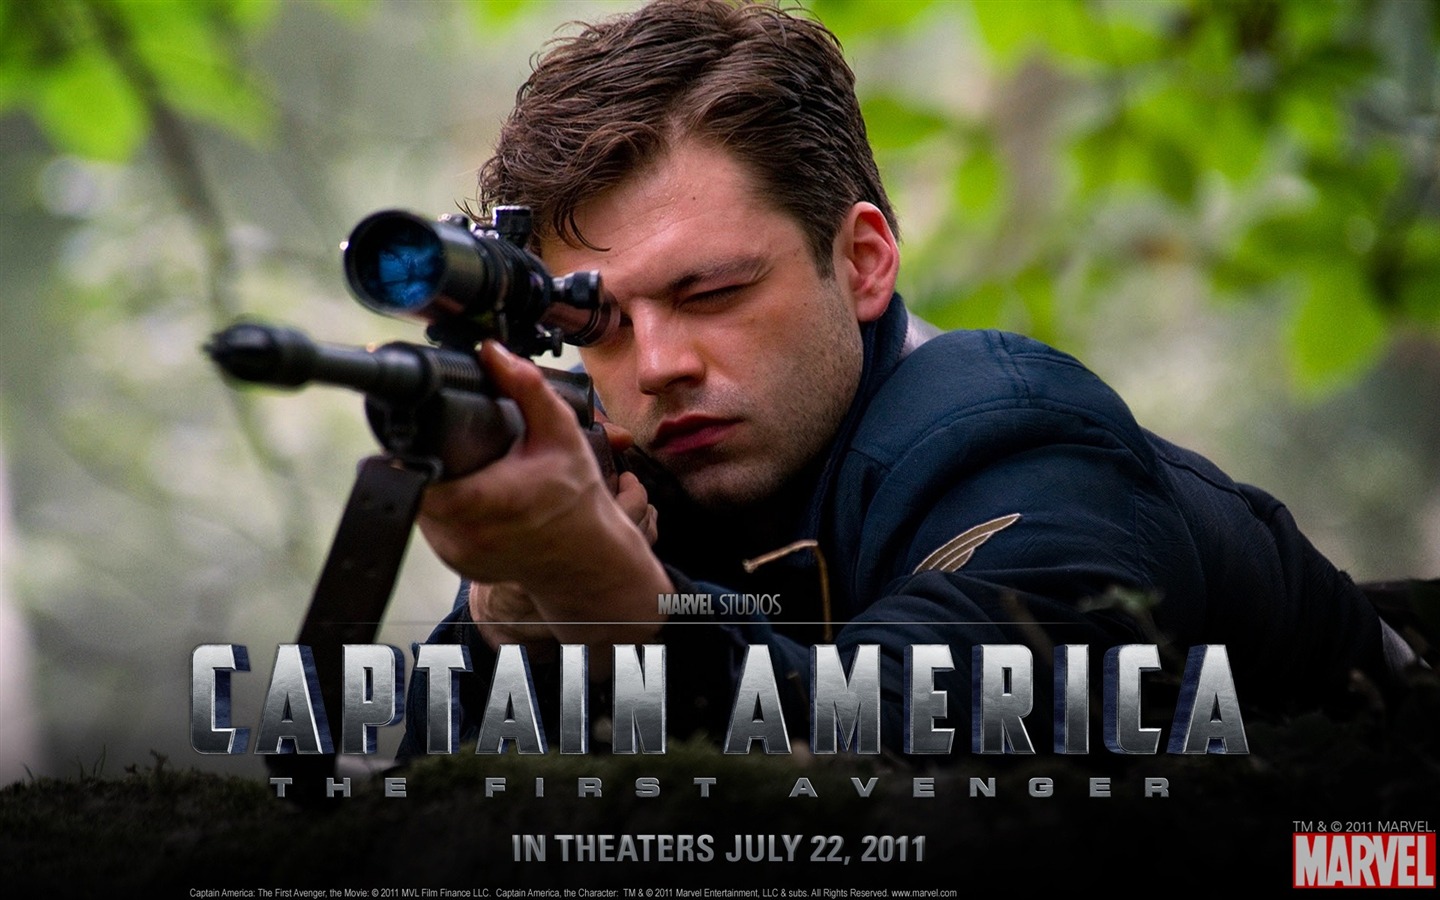 Captain America: The First Avenger wallpapers HD #18 - 1440x900